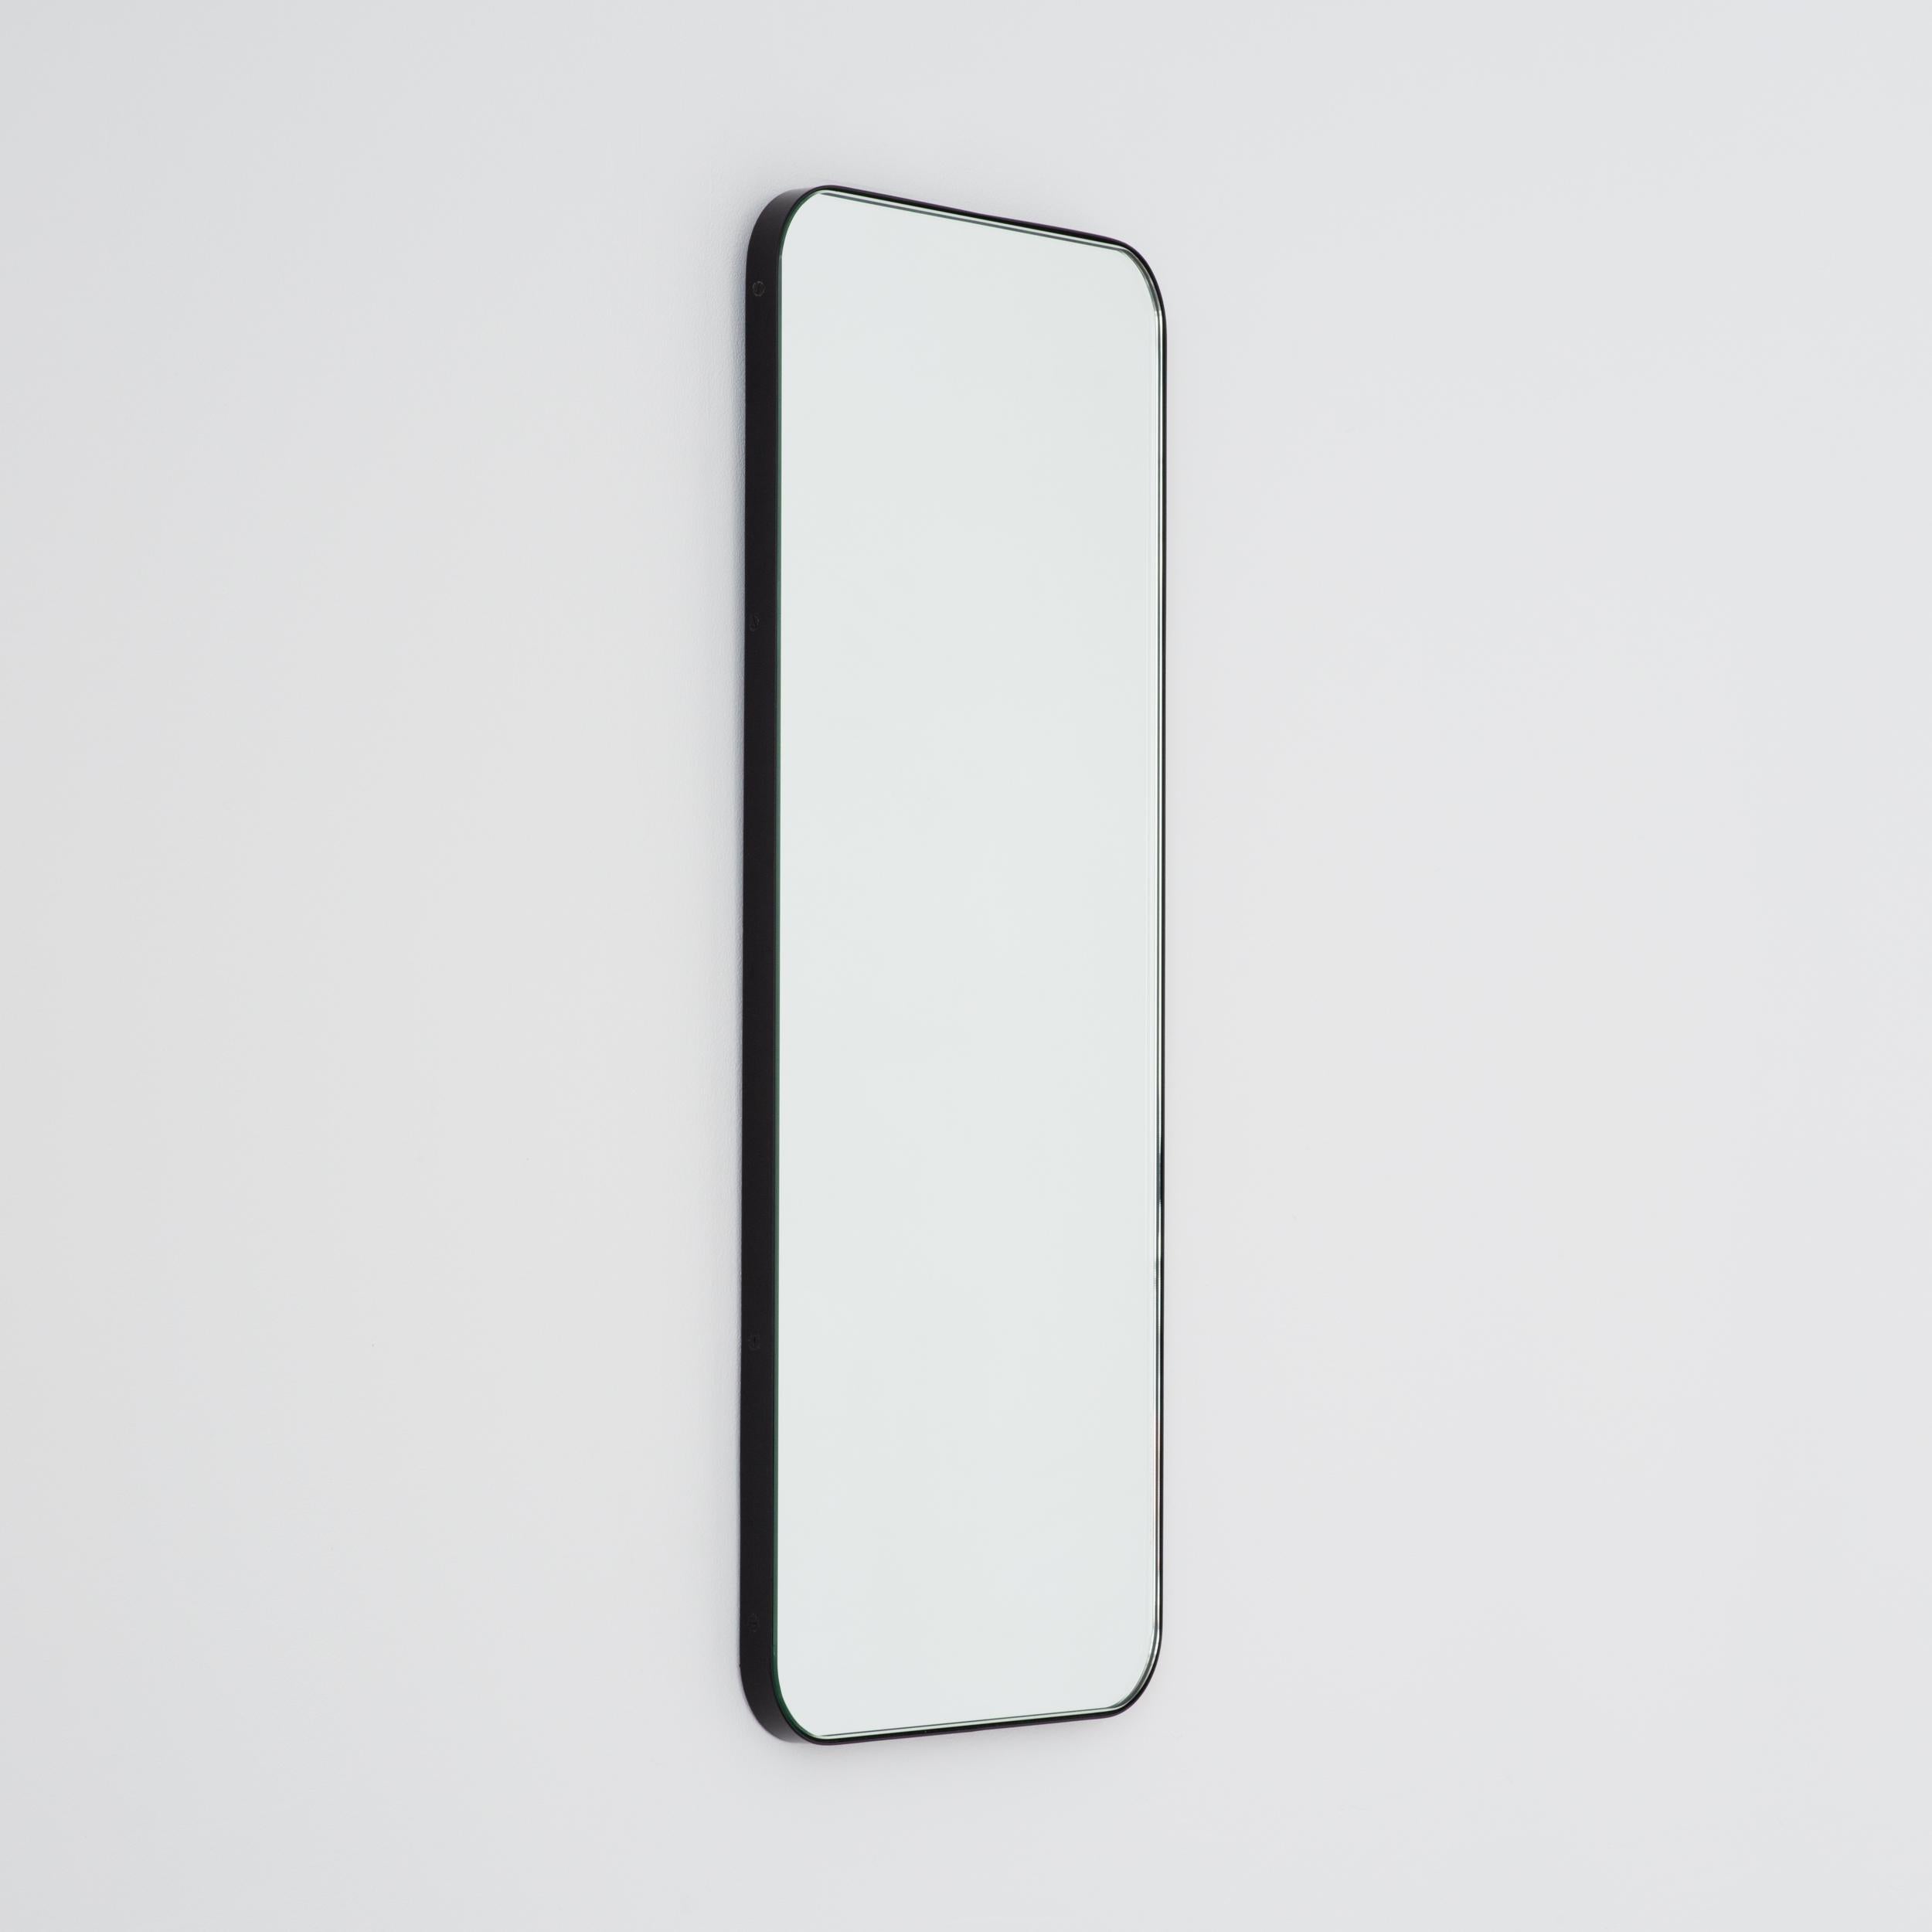 Modern rectangular mirror with an elegant black. Part of the charming Quadris collection, designed and handcrafted in London, UK. 

Medium, large and extra-large (37cm x 56cm, 46cm x 71cm and 48cm x 97cm) mirrors are fitted with an ingenious French